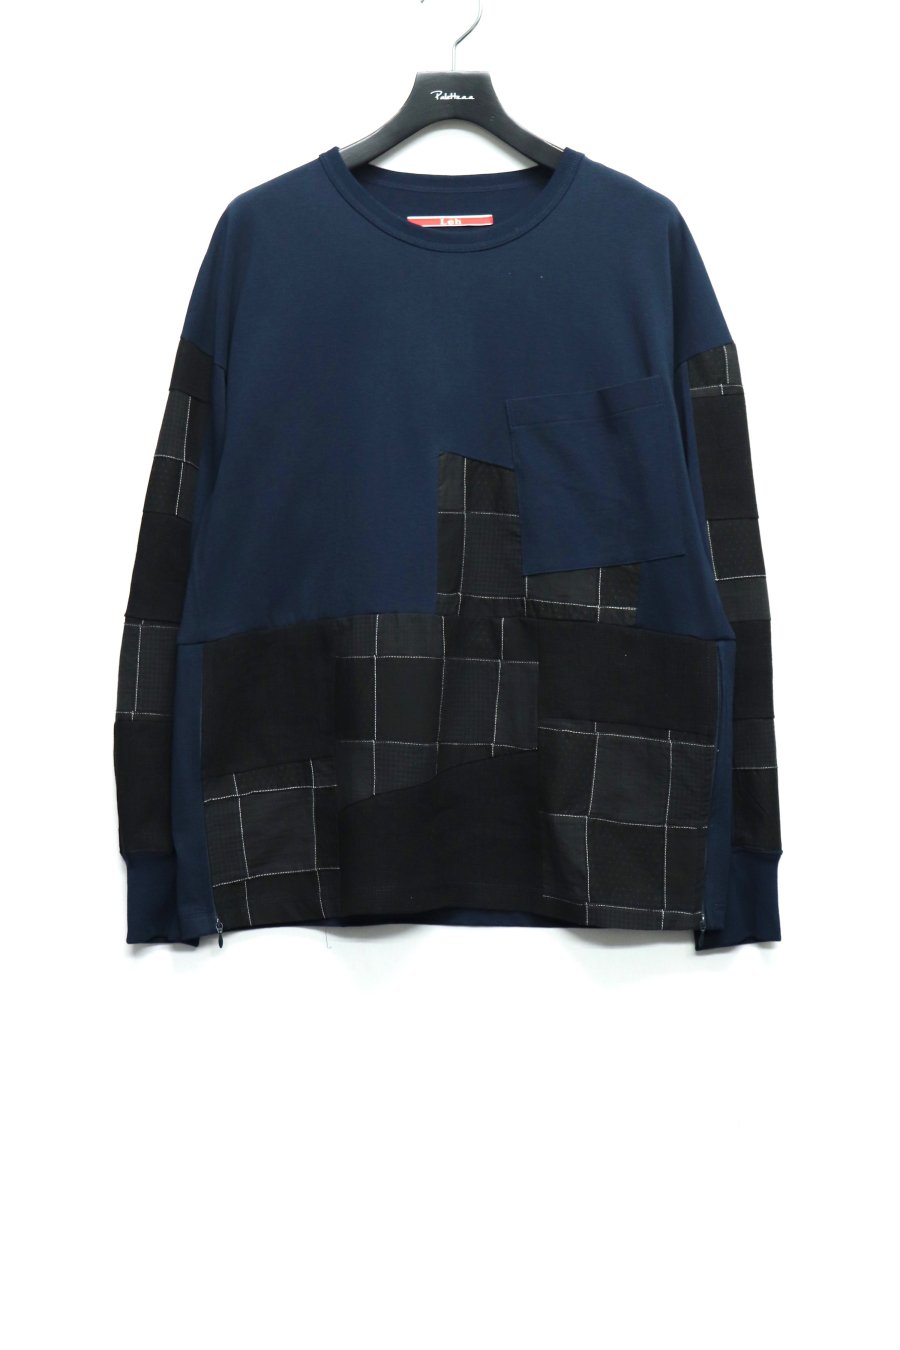 LEH  Patchwork L/S T-SH(BLACK)<img class='new_mark_img2' src='https://img.shop-pro.jp/img/new/icons15.gif' style='border:none;display:inline;margin:0px;padding:0px;width:auto;' />